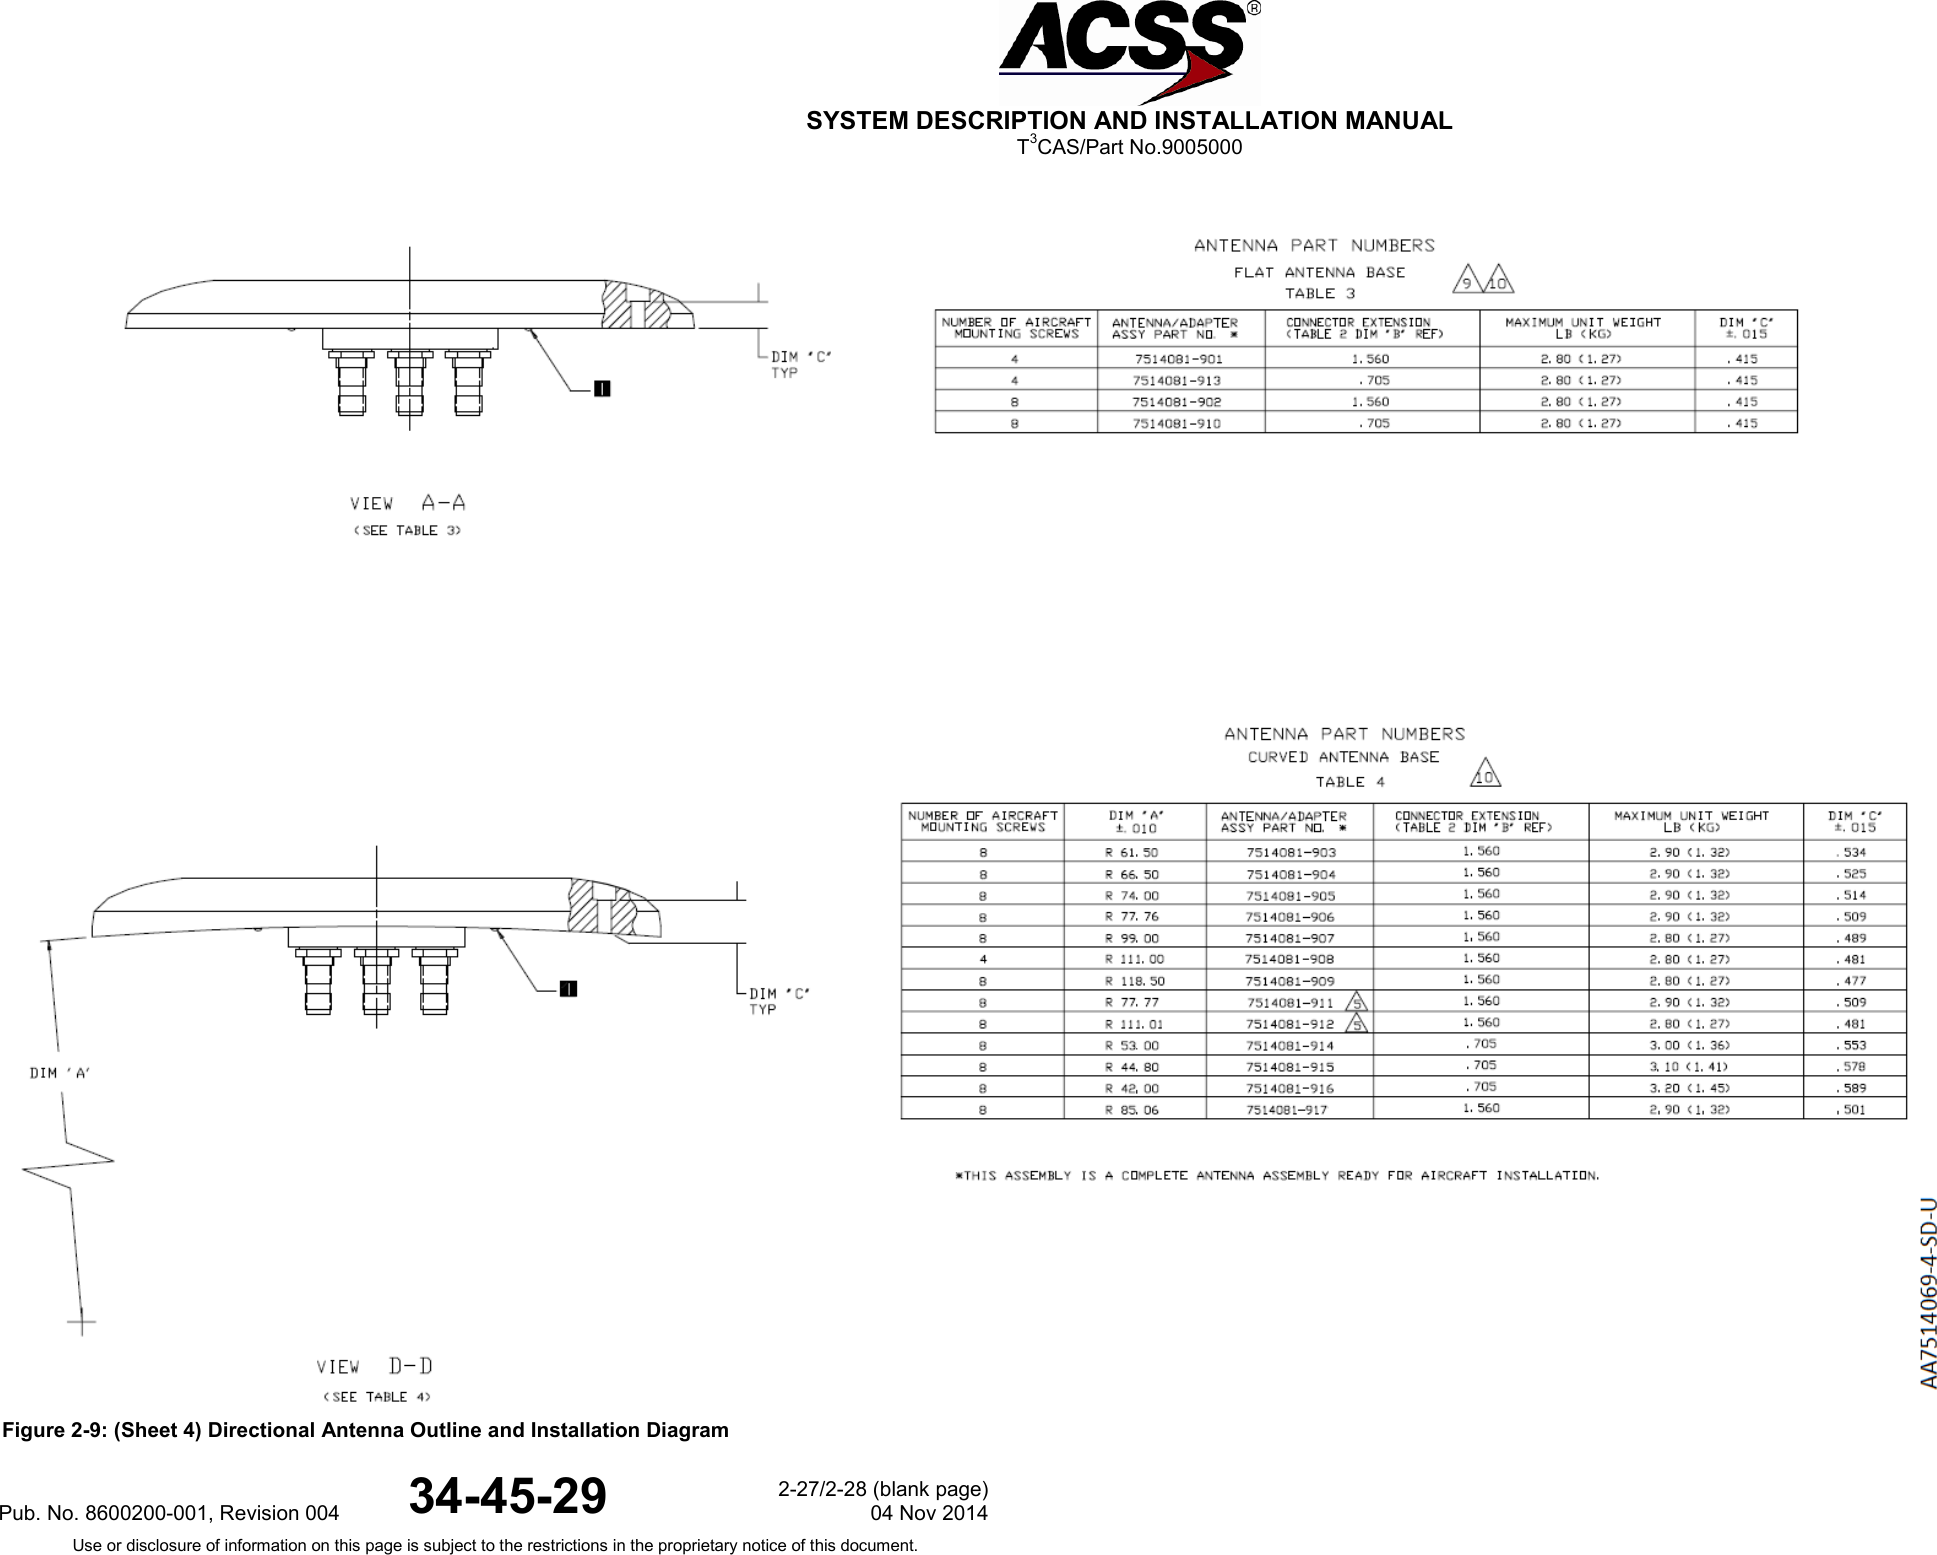  SYSTEM DESCRIPTION AND INSTALLATION MANUAL T3CAS/Part No.9005000  Figure 2-9: (Sheet 4) Directional Antenna Outline and Installation DiagramPub. No. 8600200-001, Revision 004 34-45-29 2-27/2-28 (blank page) 04 Nov 2014 Use or disclosure of information on this page is subject to the restrictions in the proprietary notice of this document.  